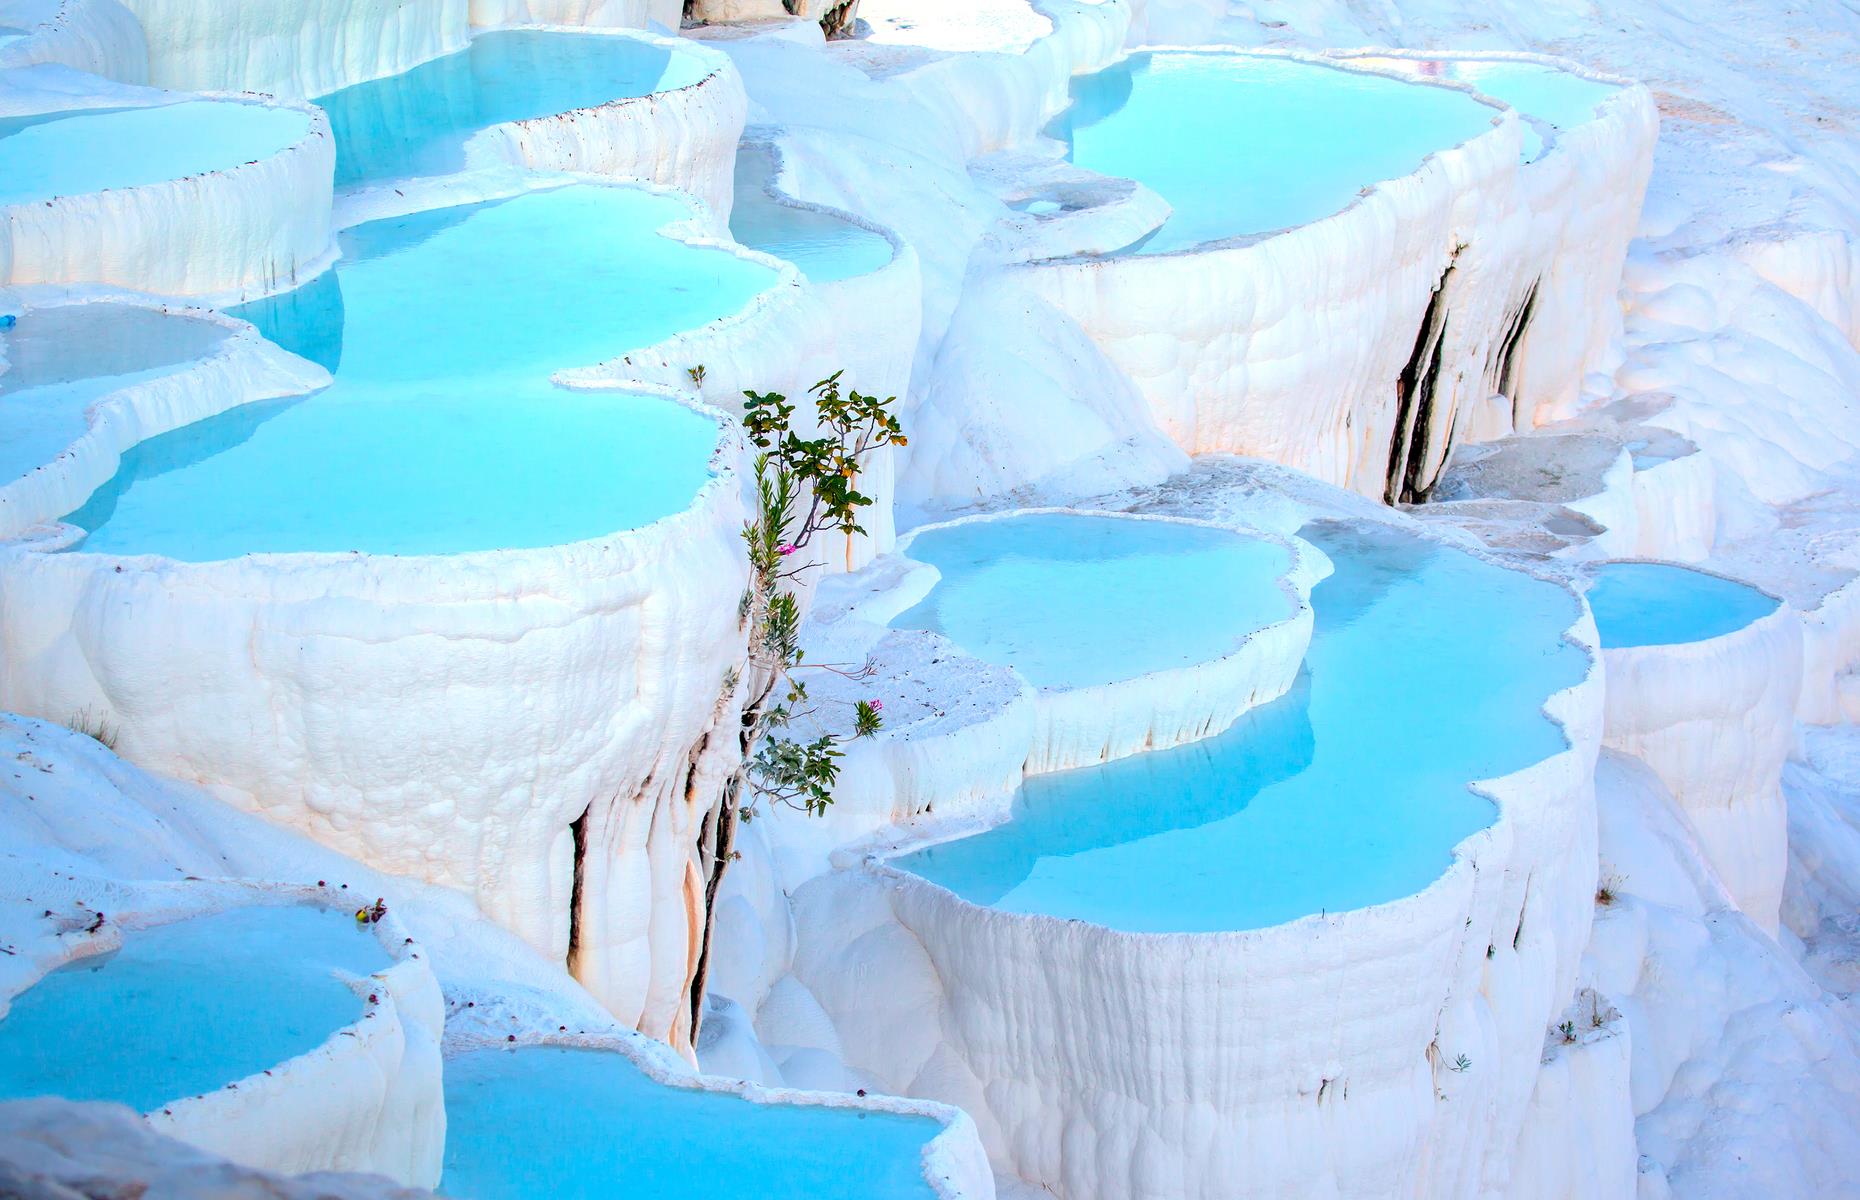 These tiered pools in Turkey are filled with milky white, hot spring water and have formed from limestone deposits over millions of years. The 17 terraces are strictly for looking at, not swimming in, but you can bathe in thermal waters at Cleopatra’s pool, above. To beat the crowds, stay in nearby Pamukkale village and visit in the early morning. The best time to go is spring, when the weather is clear but not too hot.